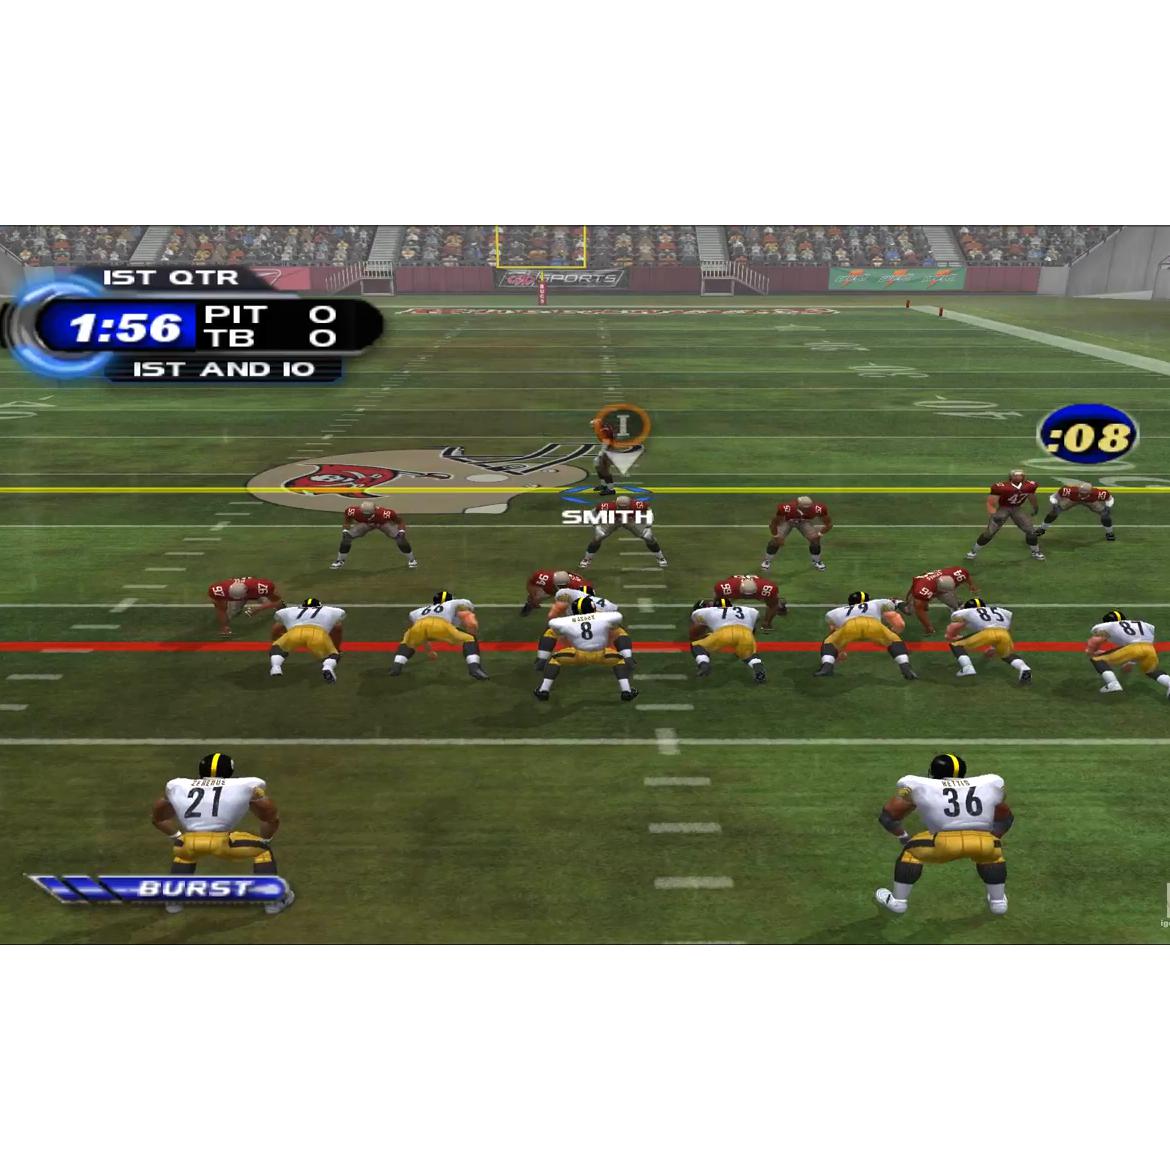 NFL Blitz Pro - PlayStation 2 (PS2) Game Complete - YourGamingShop.com - Buy, Sell, Trade Video Games Online. 120 Day Warranty. Satisfaction Guaranteed.